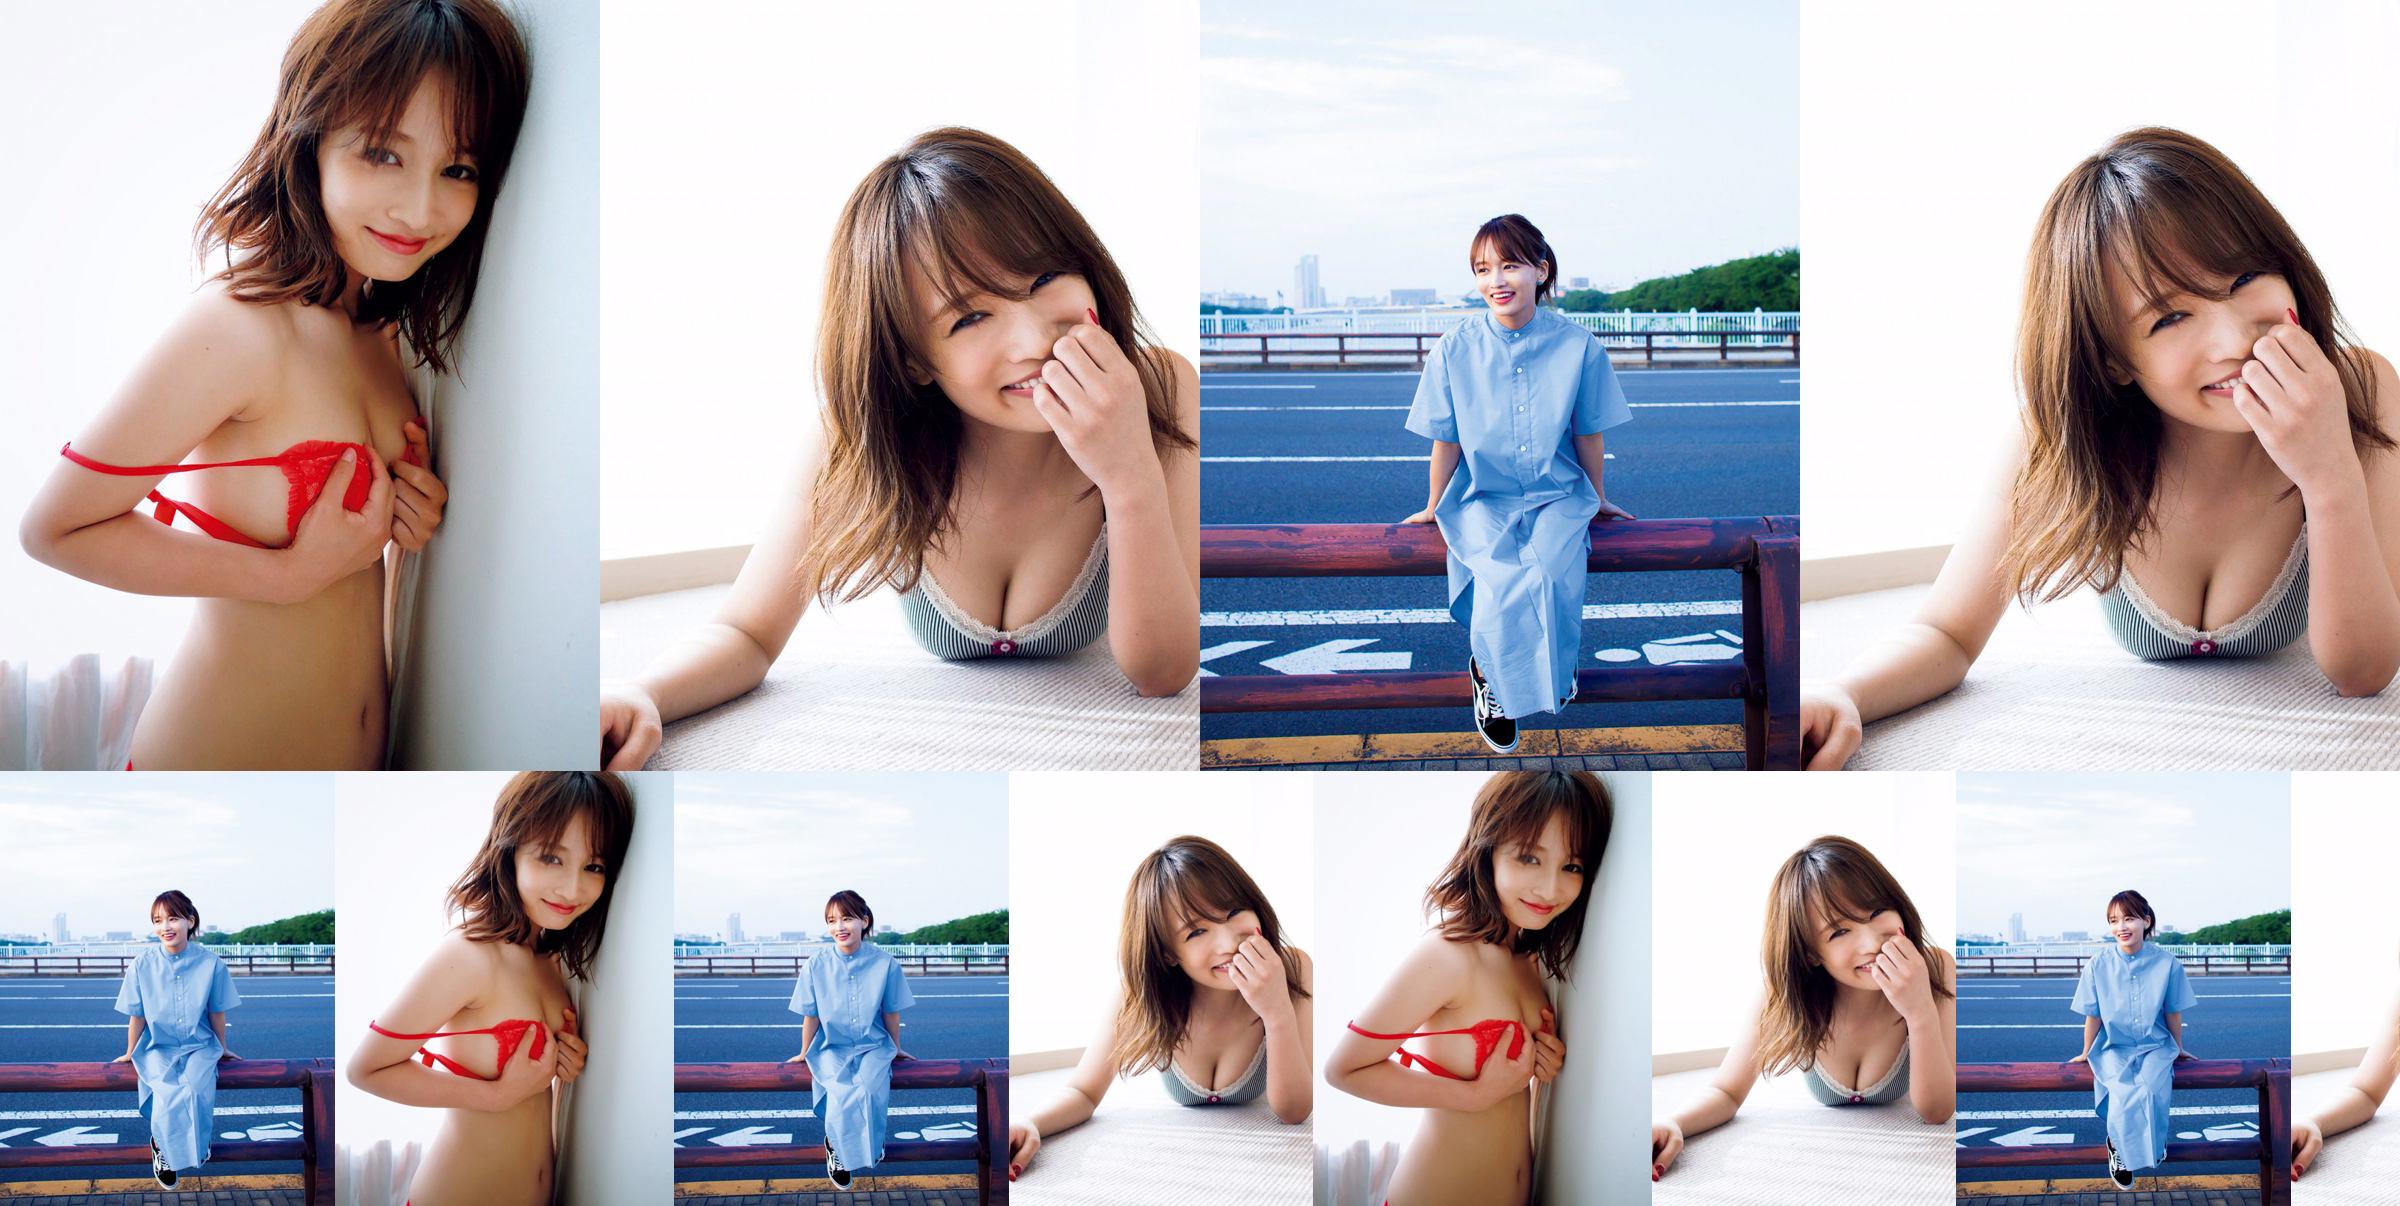 [FRIDAY] Mai Watanabe "F cup with a thin body" photo No.d612e5 Page 2